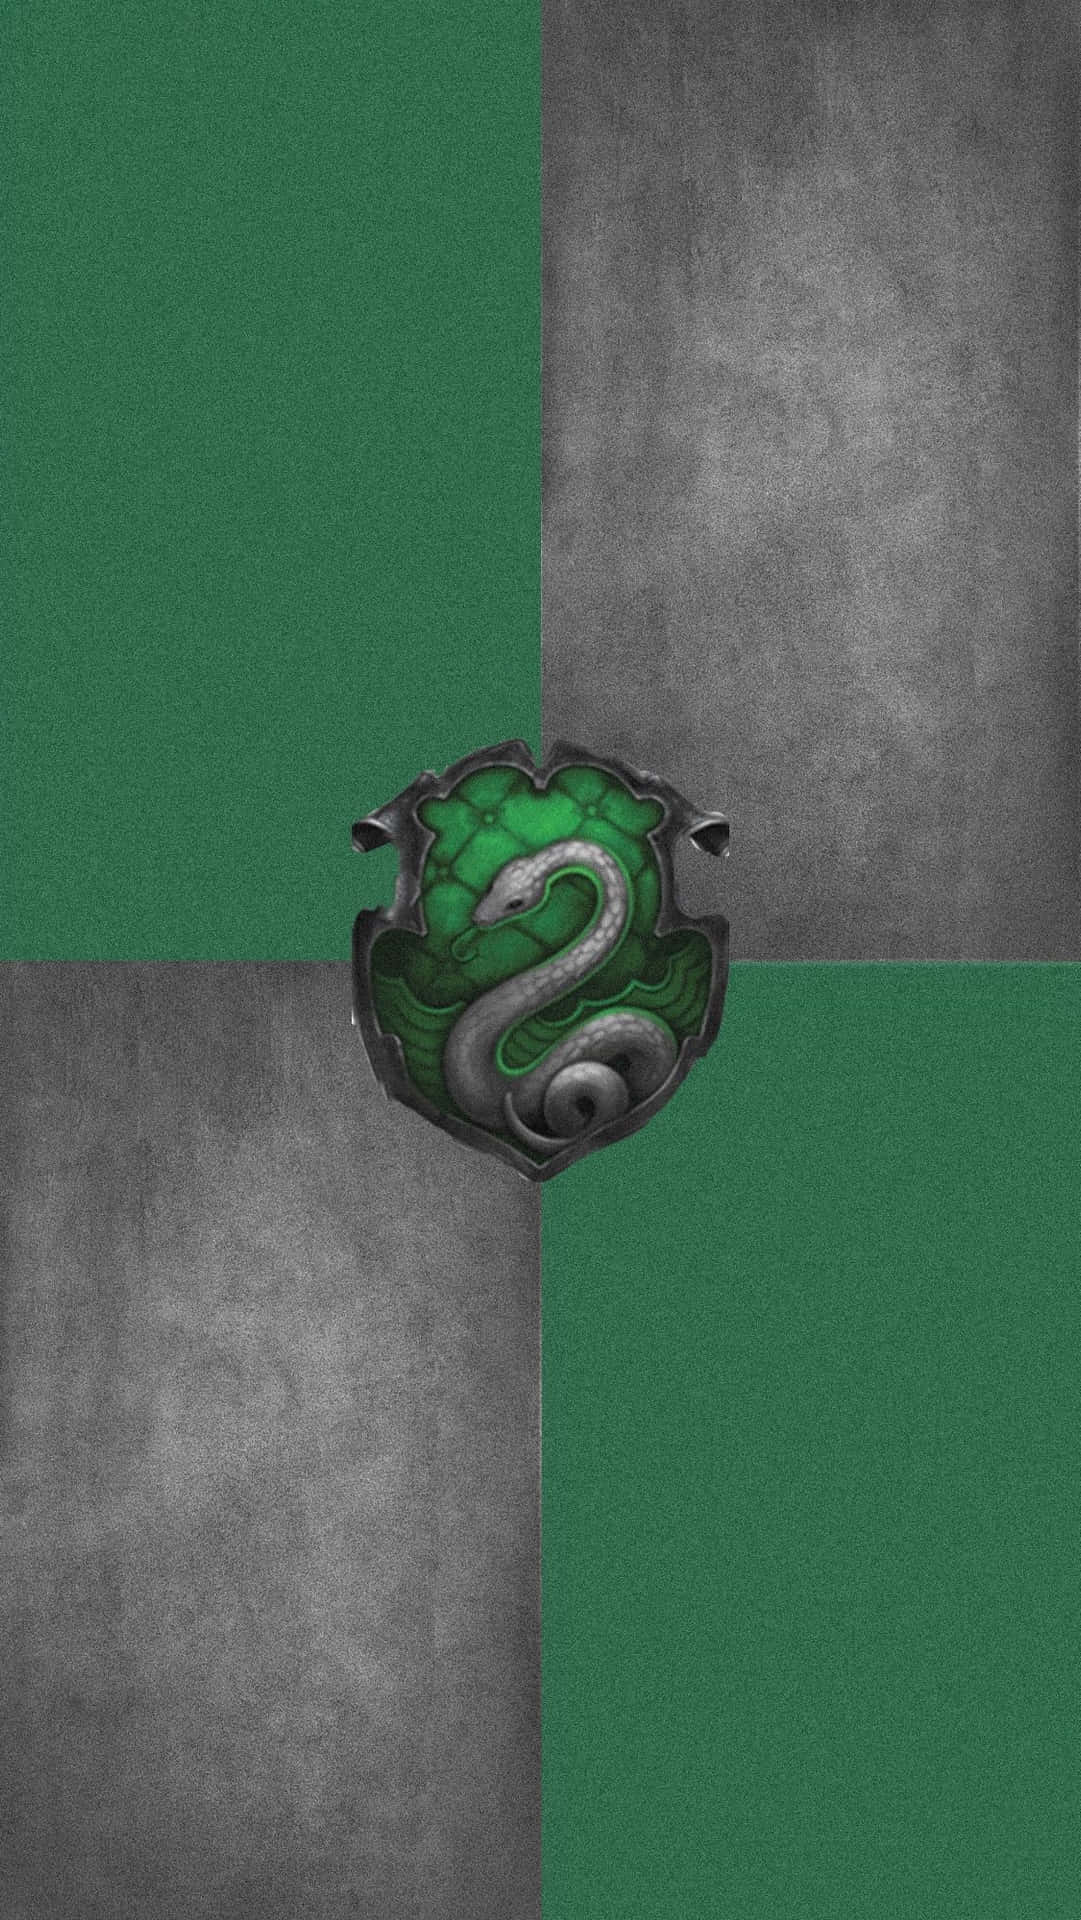 "Be a proud member of Slytherin wherever you are with your Slytherin Phone!" Wallpaper